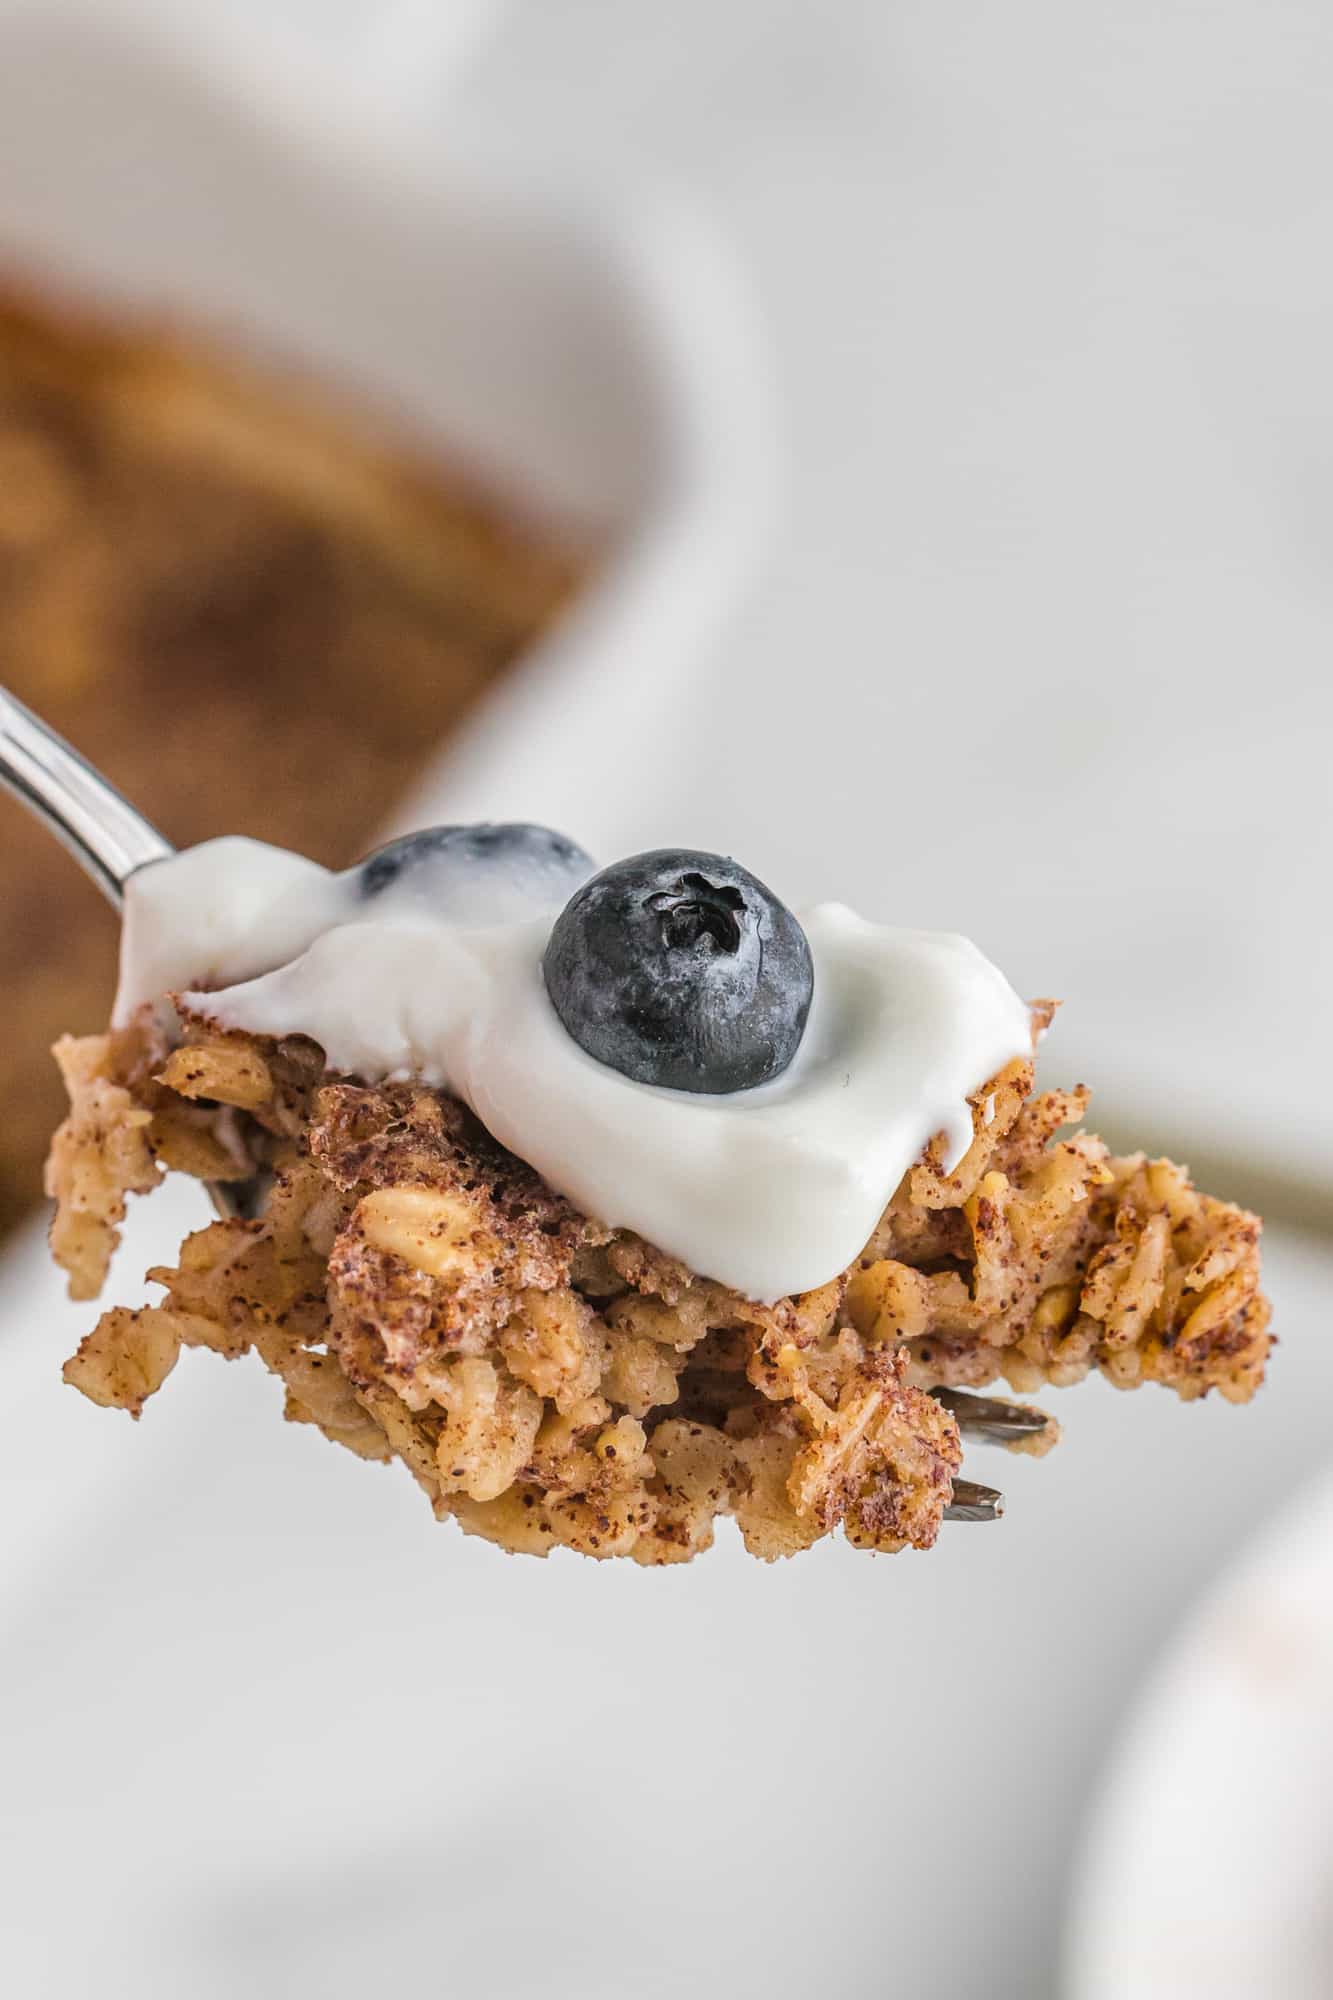 Baked oatmeal on a fork with yogurt and blueberries.